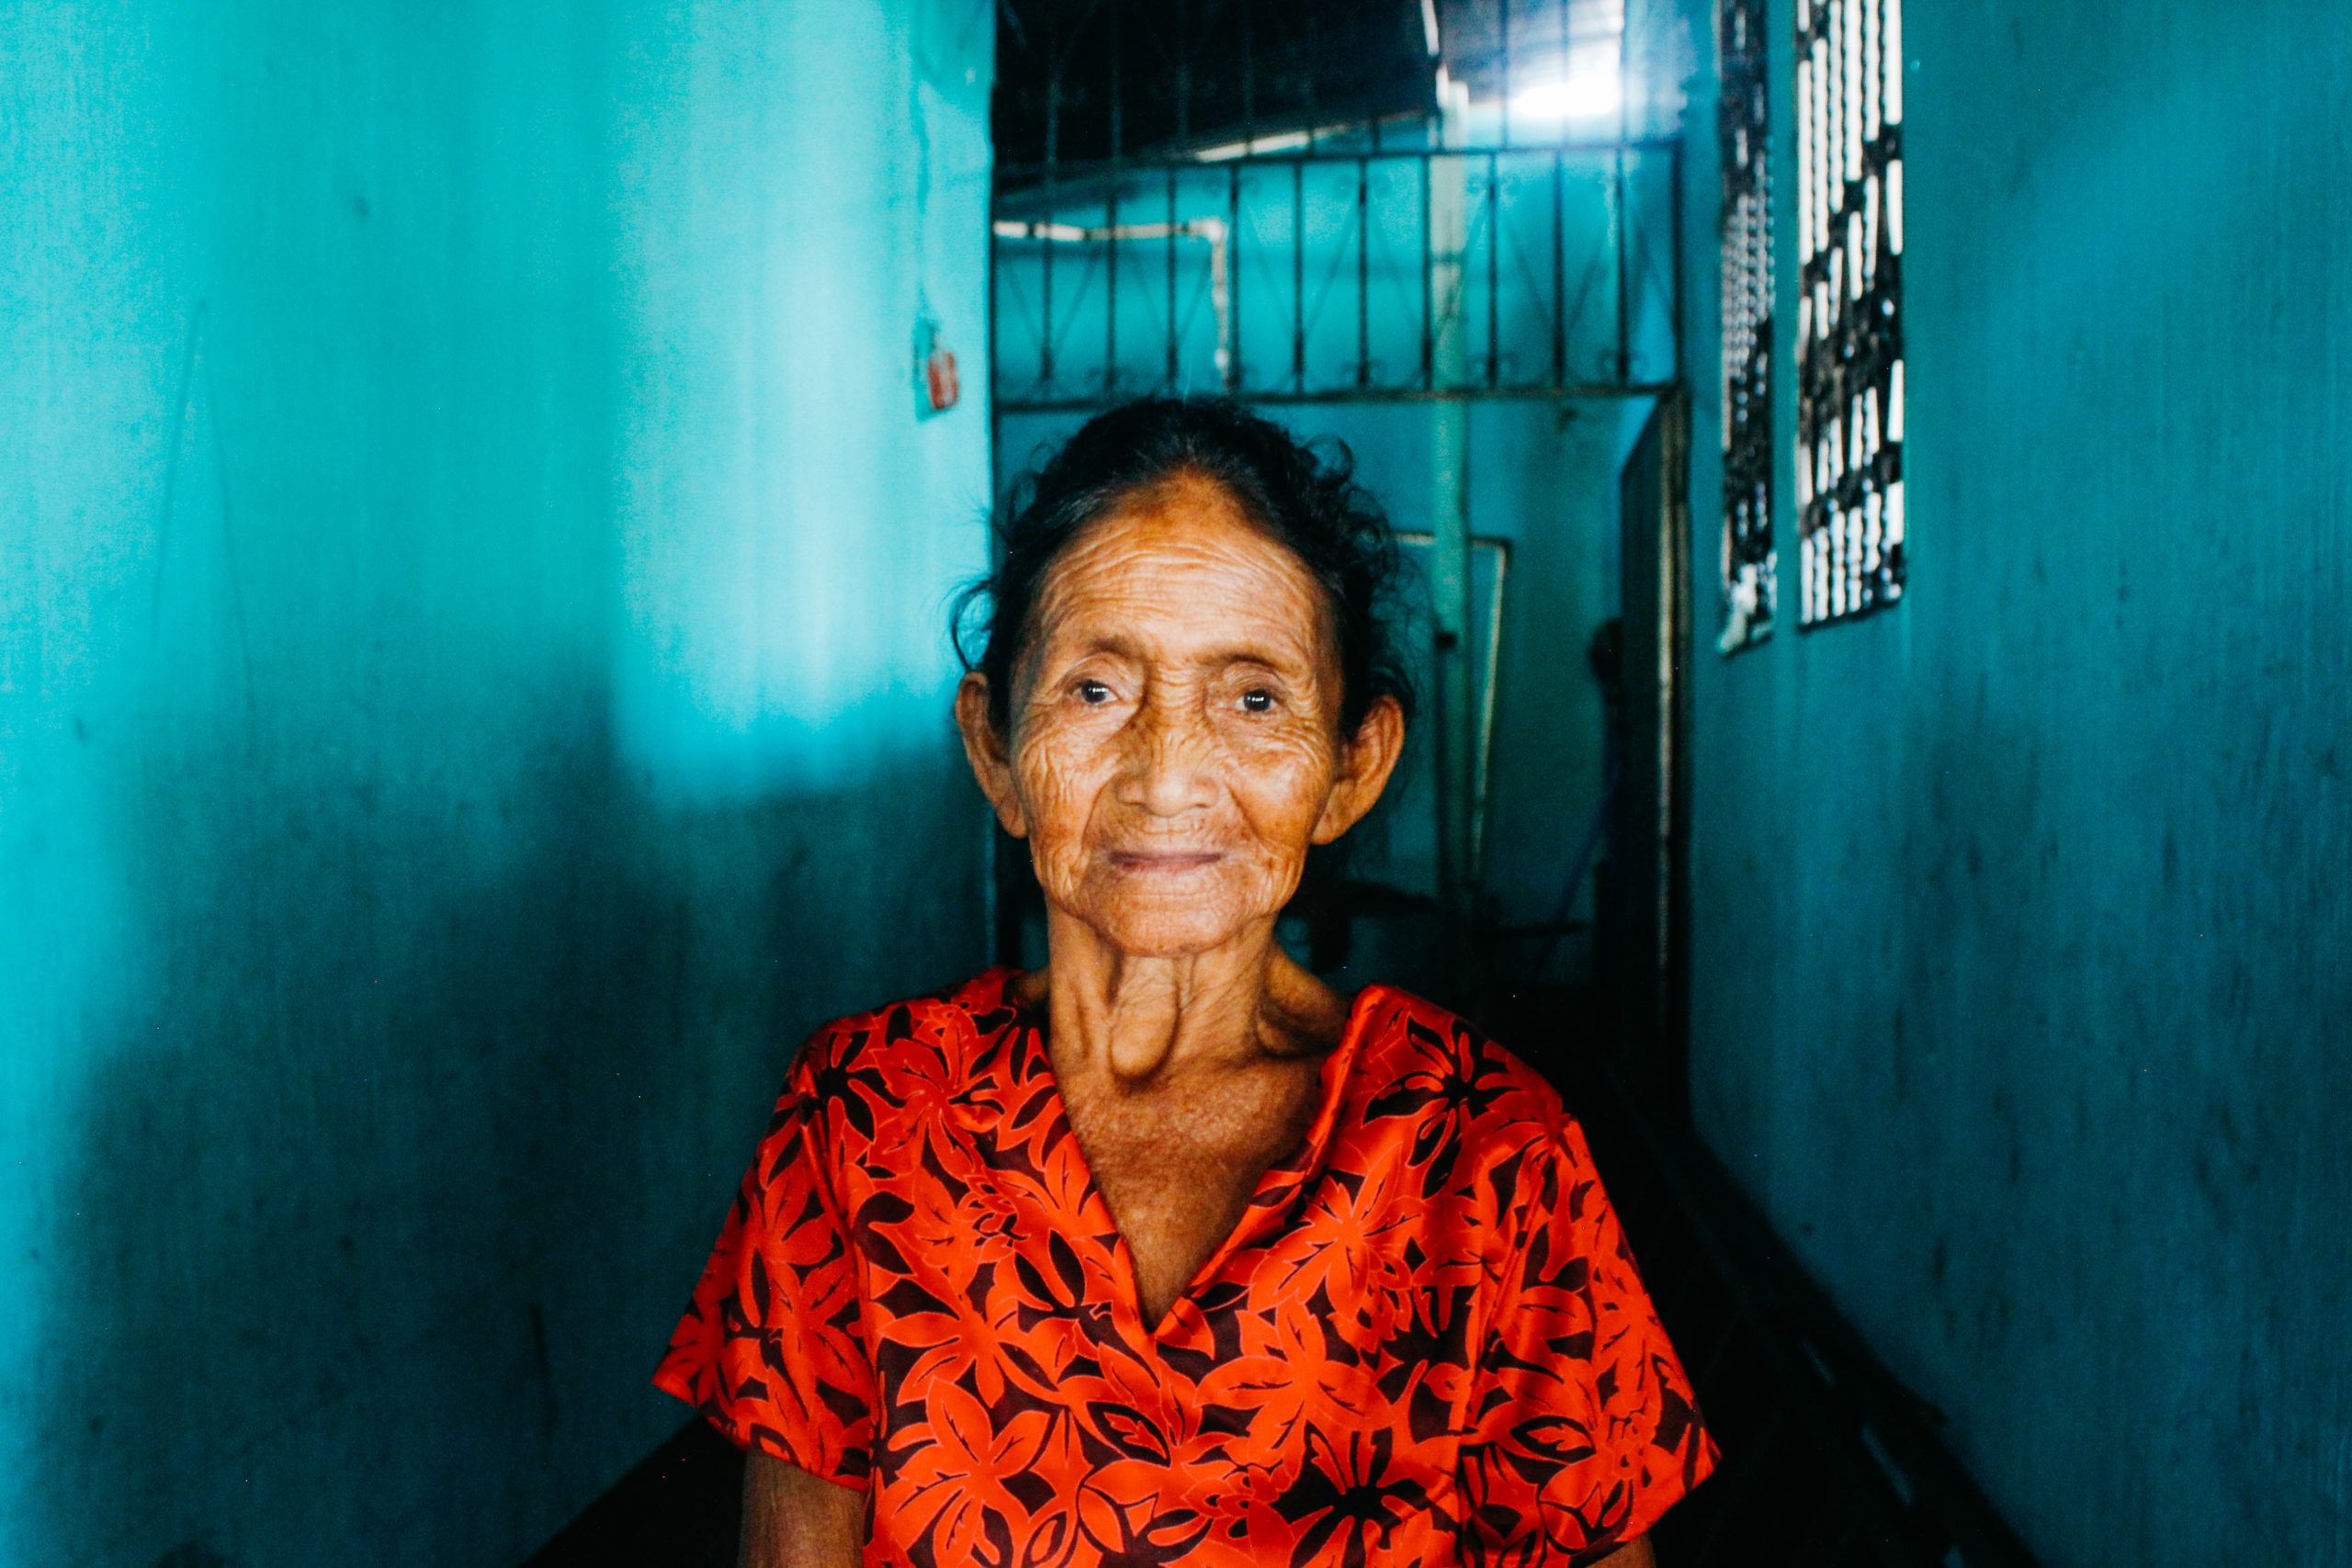 An older Guatemalan woman wearing red stands in a bright blue hallway